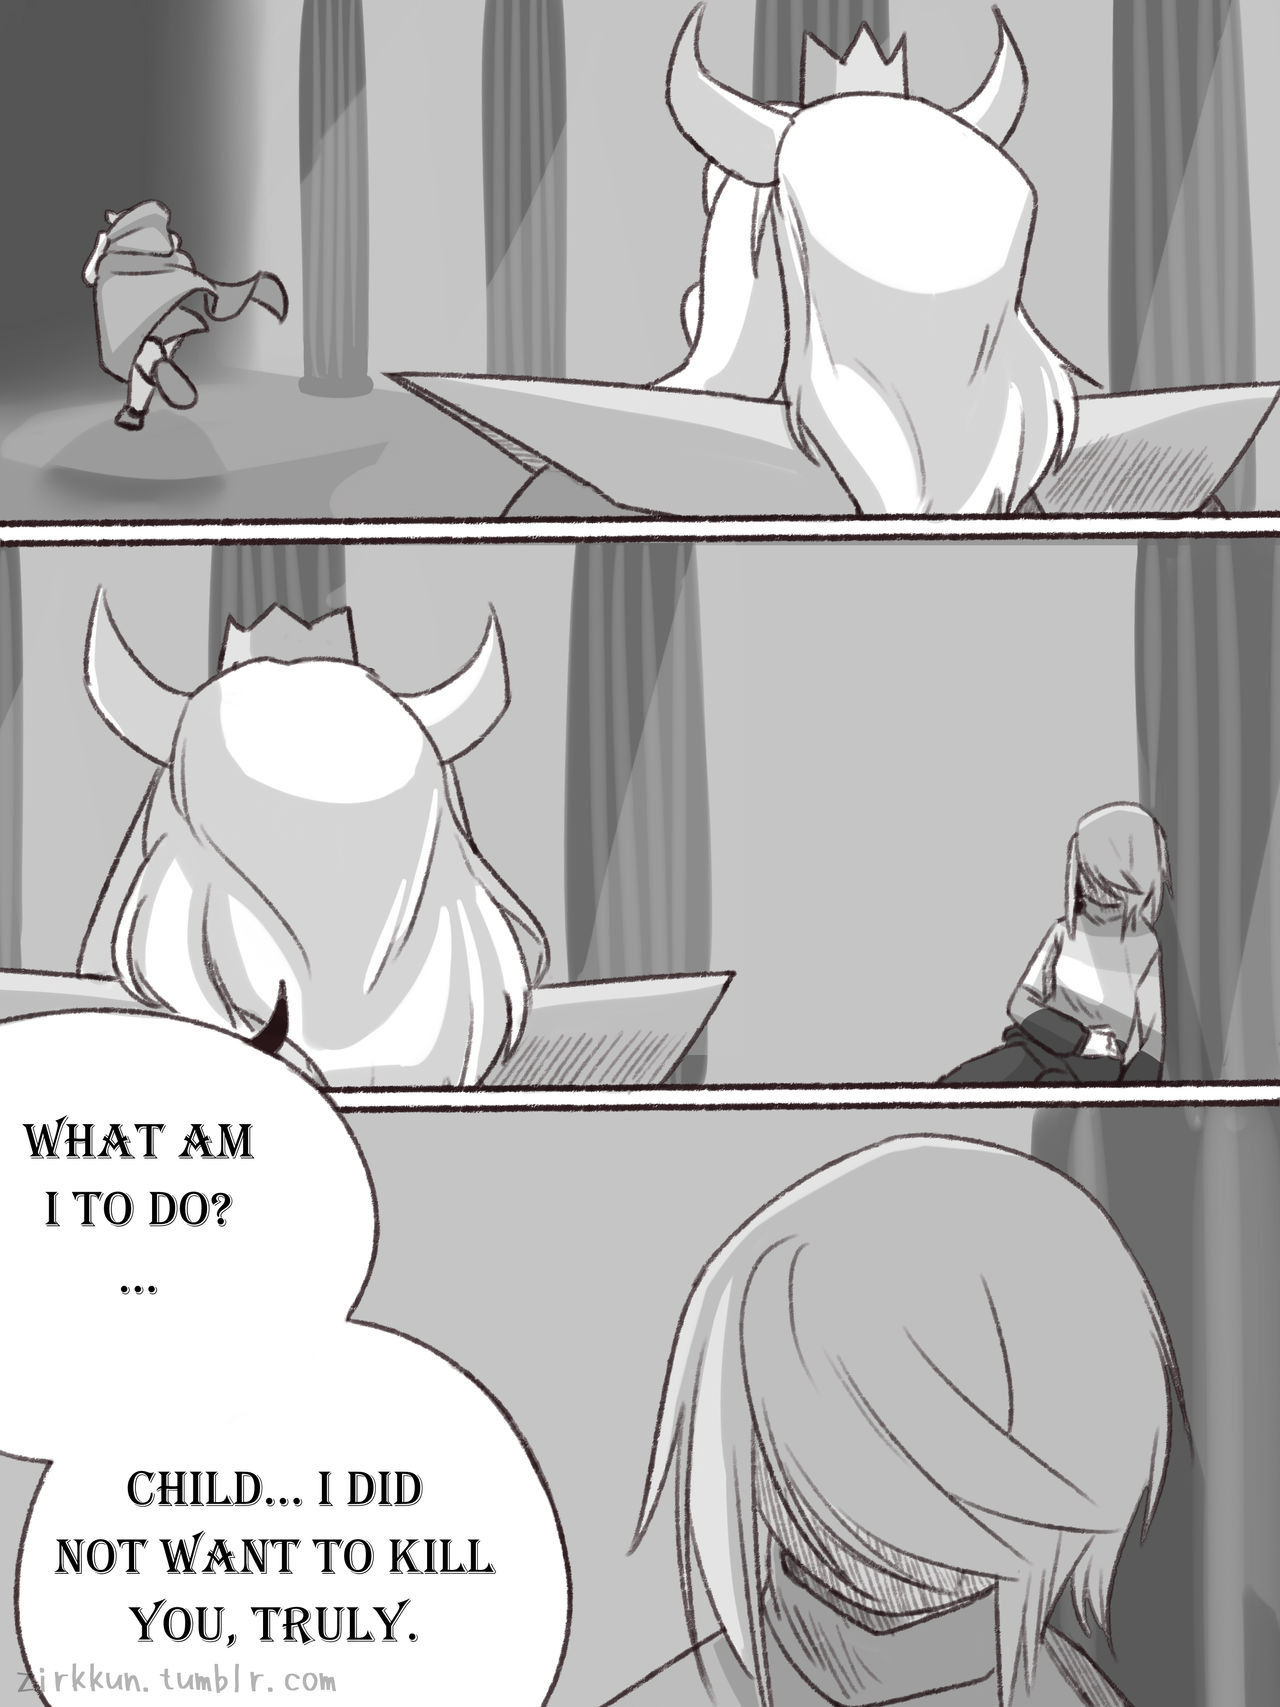 Posts with tags Undertale AU, Comics - page 5 